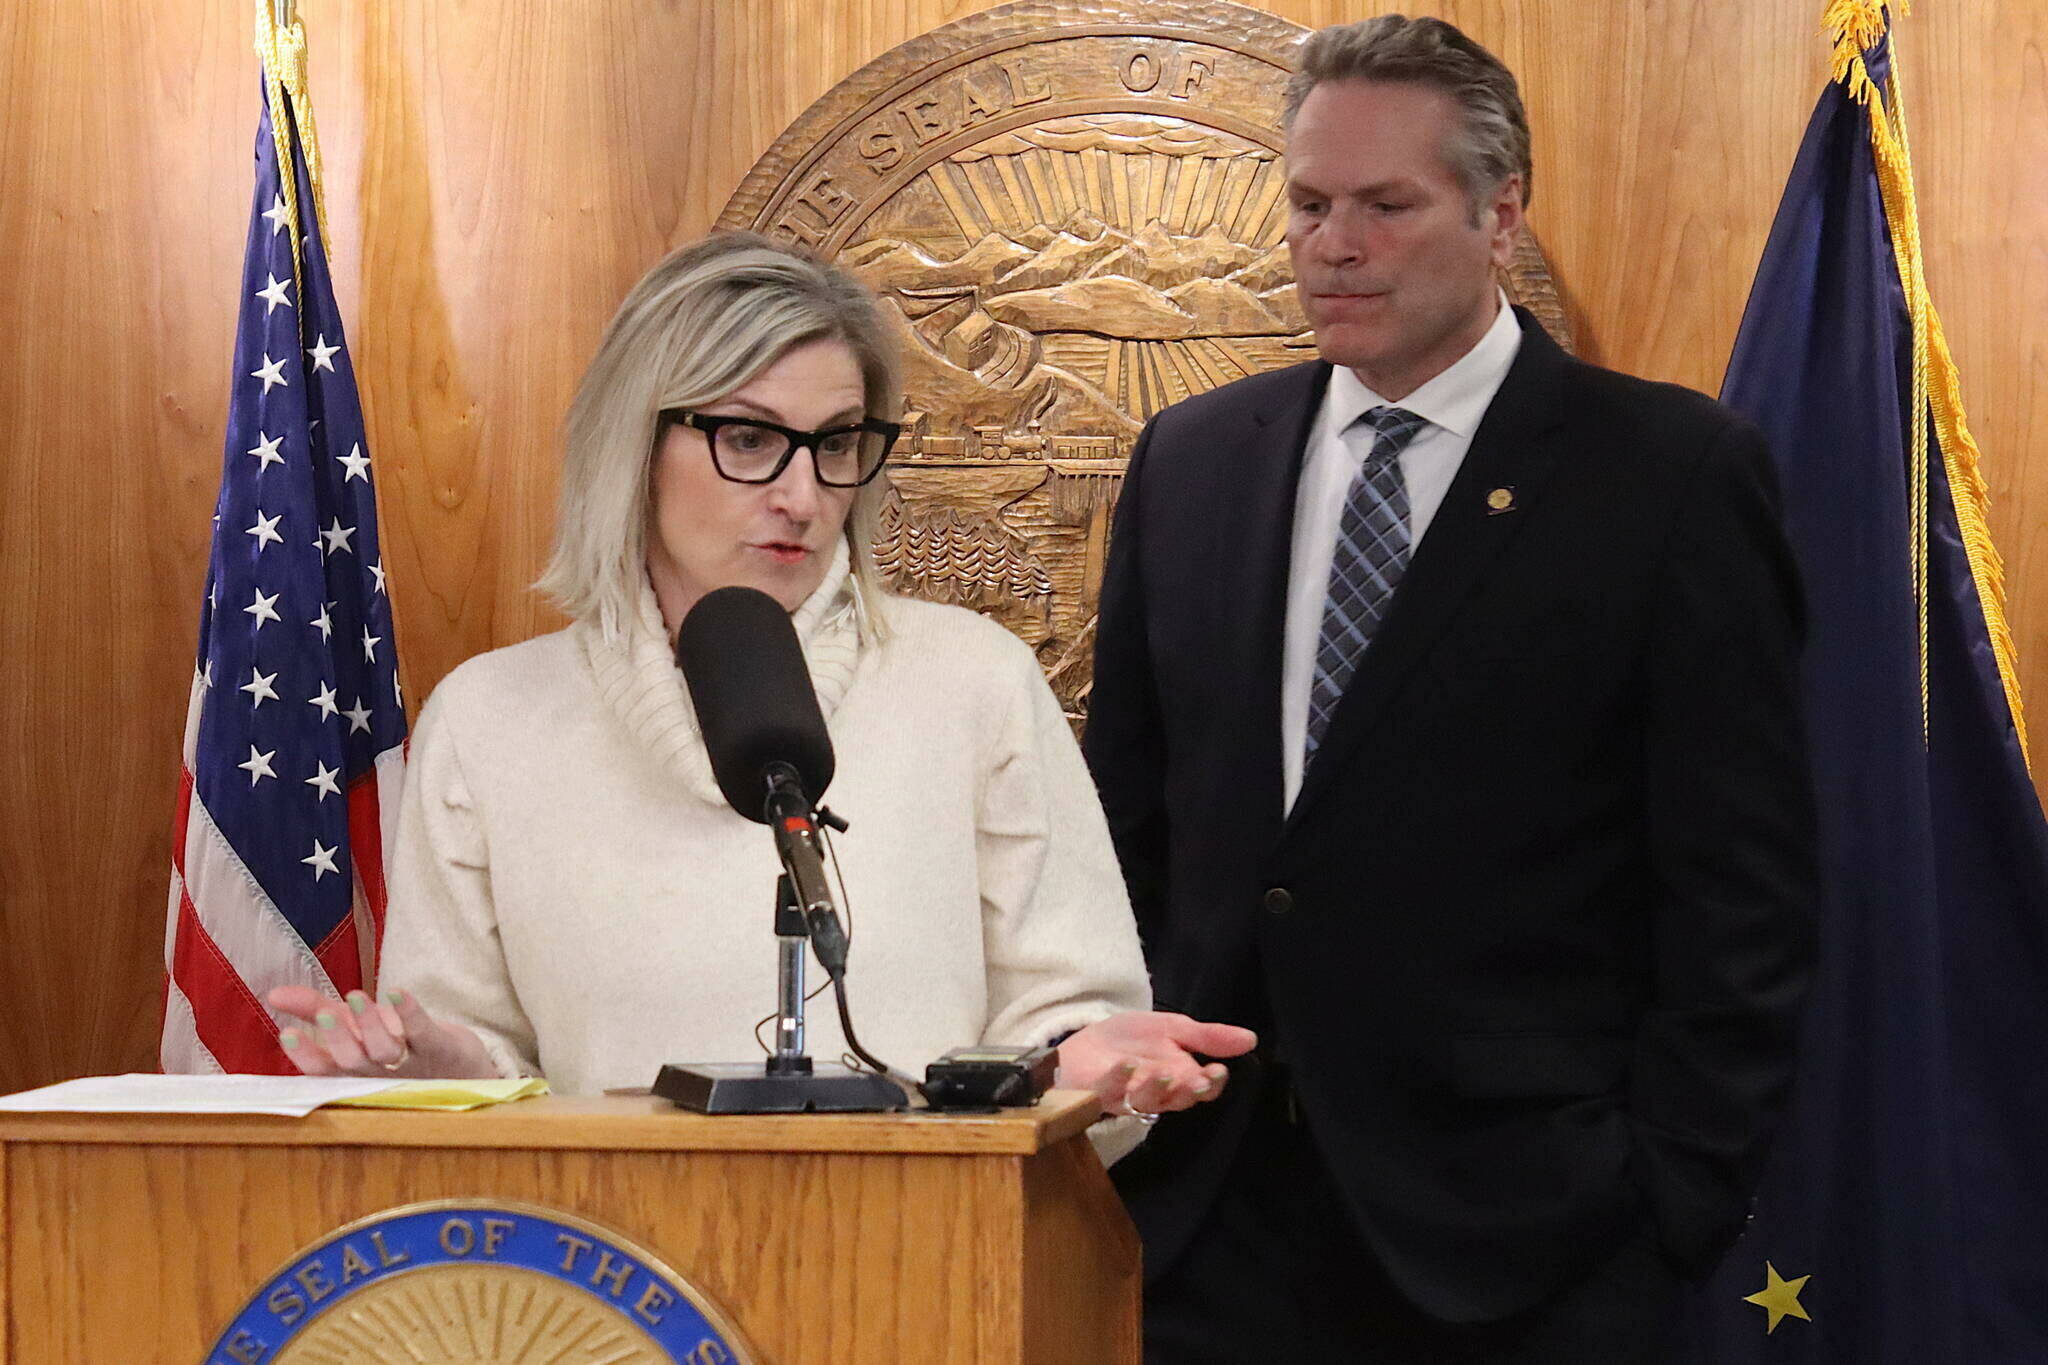 Alaska Department of Education and Early Development Commissioner Deena Bishop and Gov. Mike Dunleavy discuss his veto of an education bill during a press conference March 15 at the Alaska State Capitol. (Mark Sabbatini / Juneau Empire file photo)